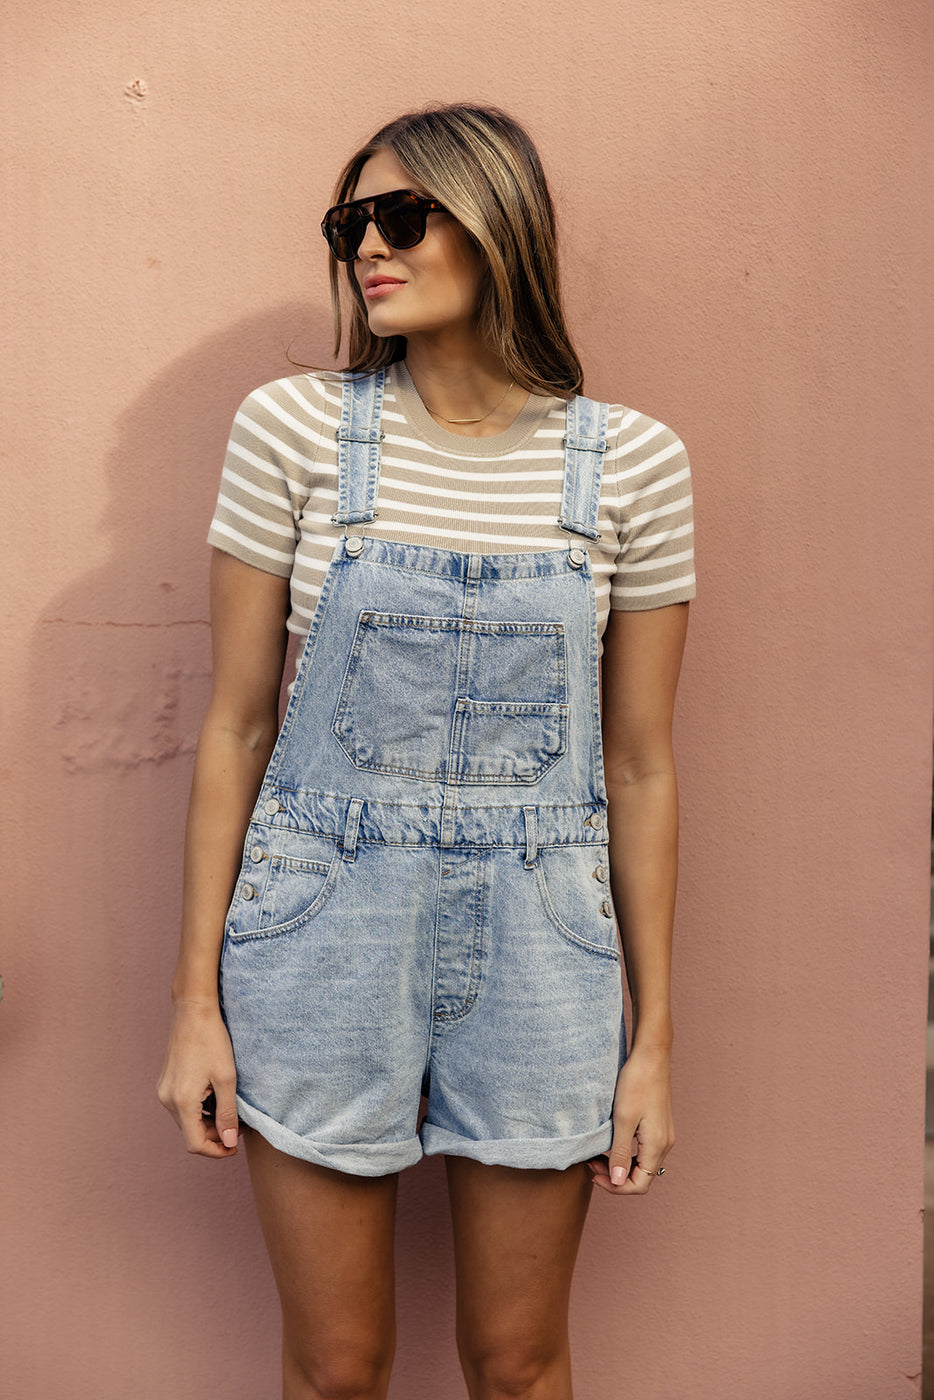 a woman wearing sunglasses and overalls